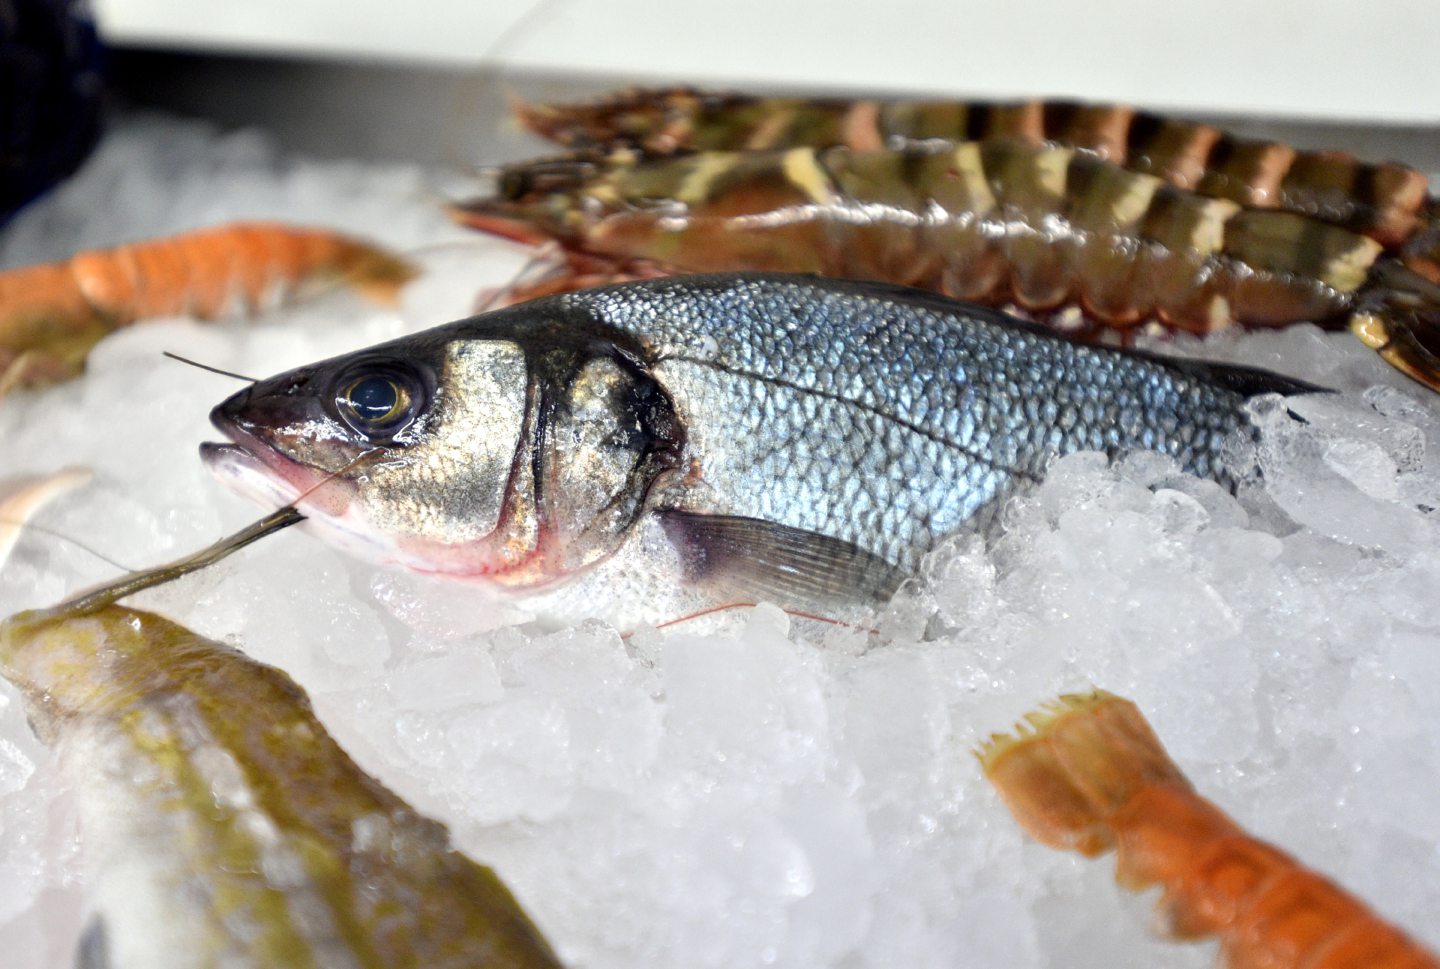 The seafood sector will play a role in Aberdeenshire's Covid-19 recovery.